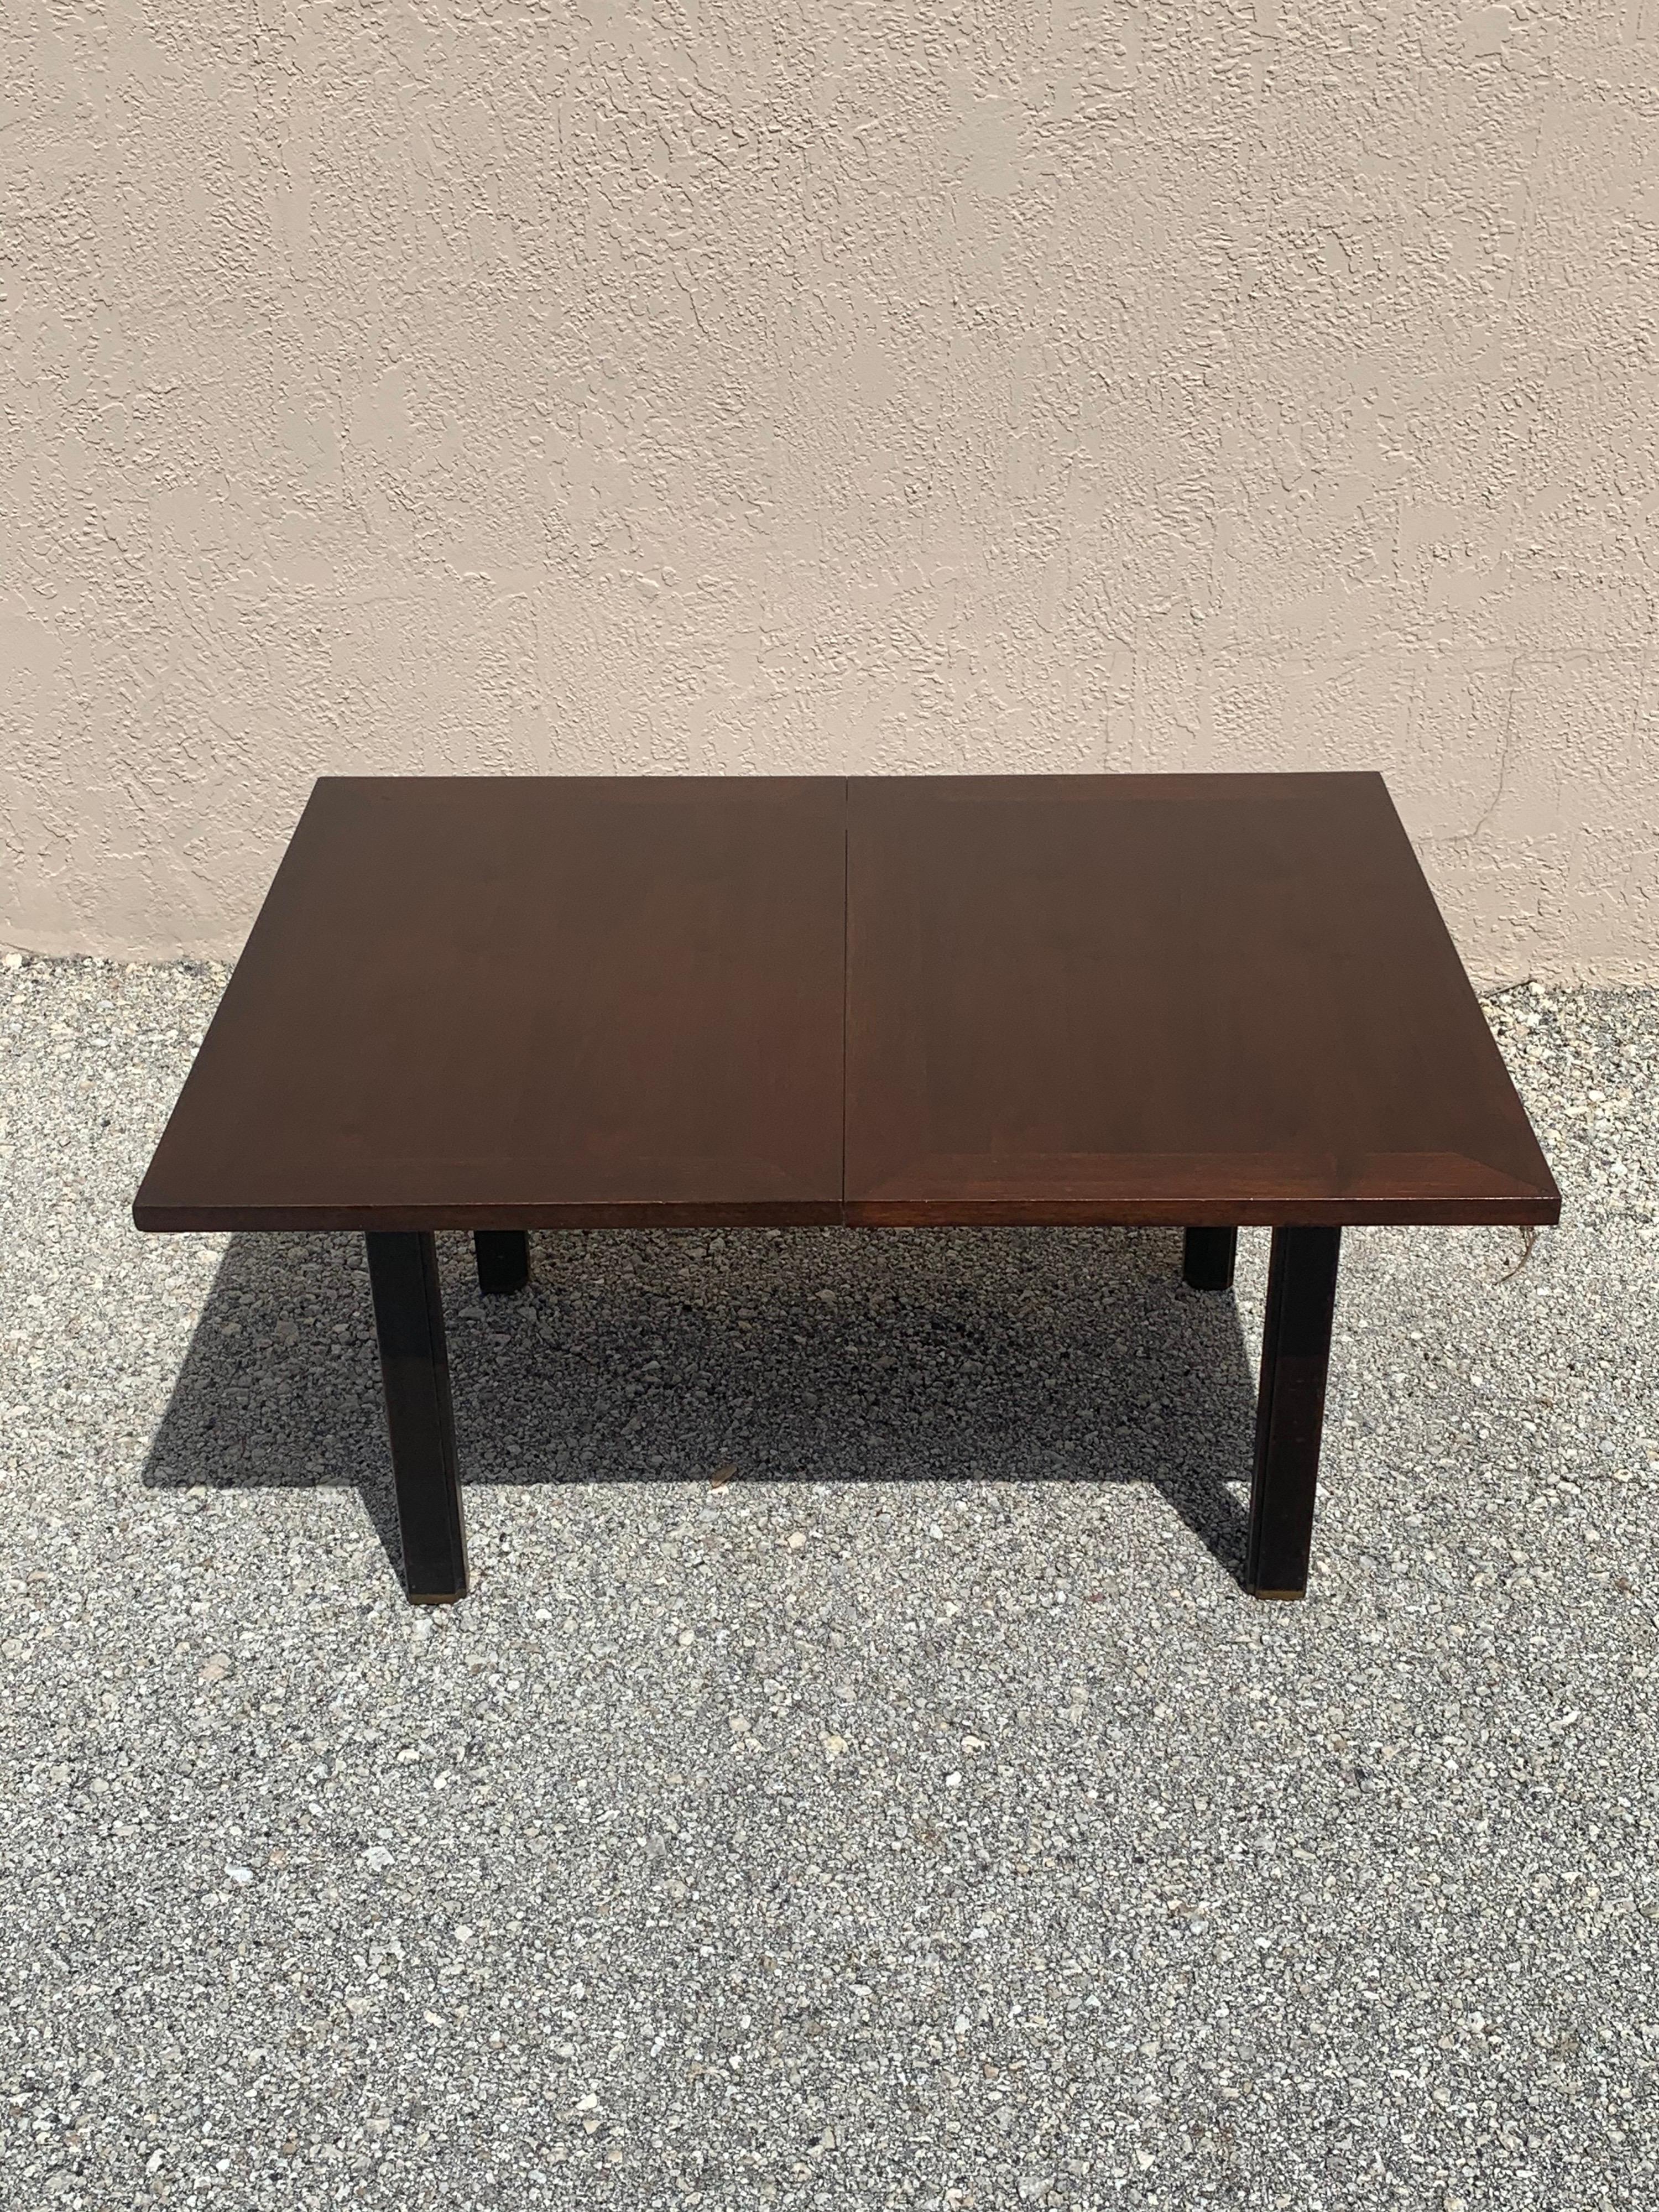 20th Century Uncommon Edward Wormley for Dunbar Flip Top Coffee Table For Sale